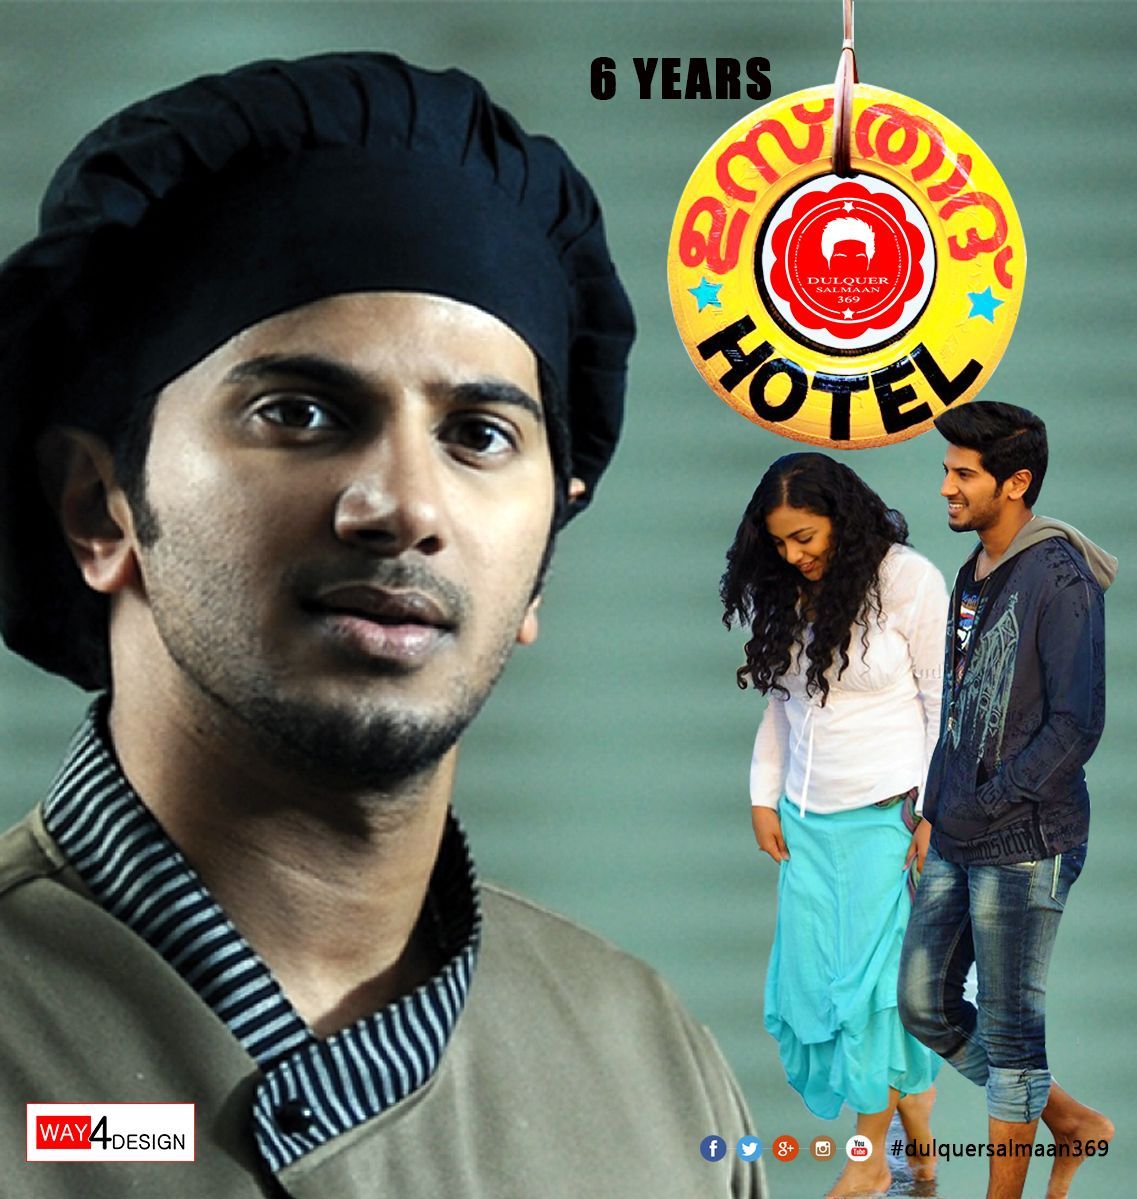 Dulquer Salmaan 369 Official. Ustad hotel, Actors, Upcoming movies